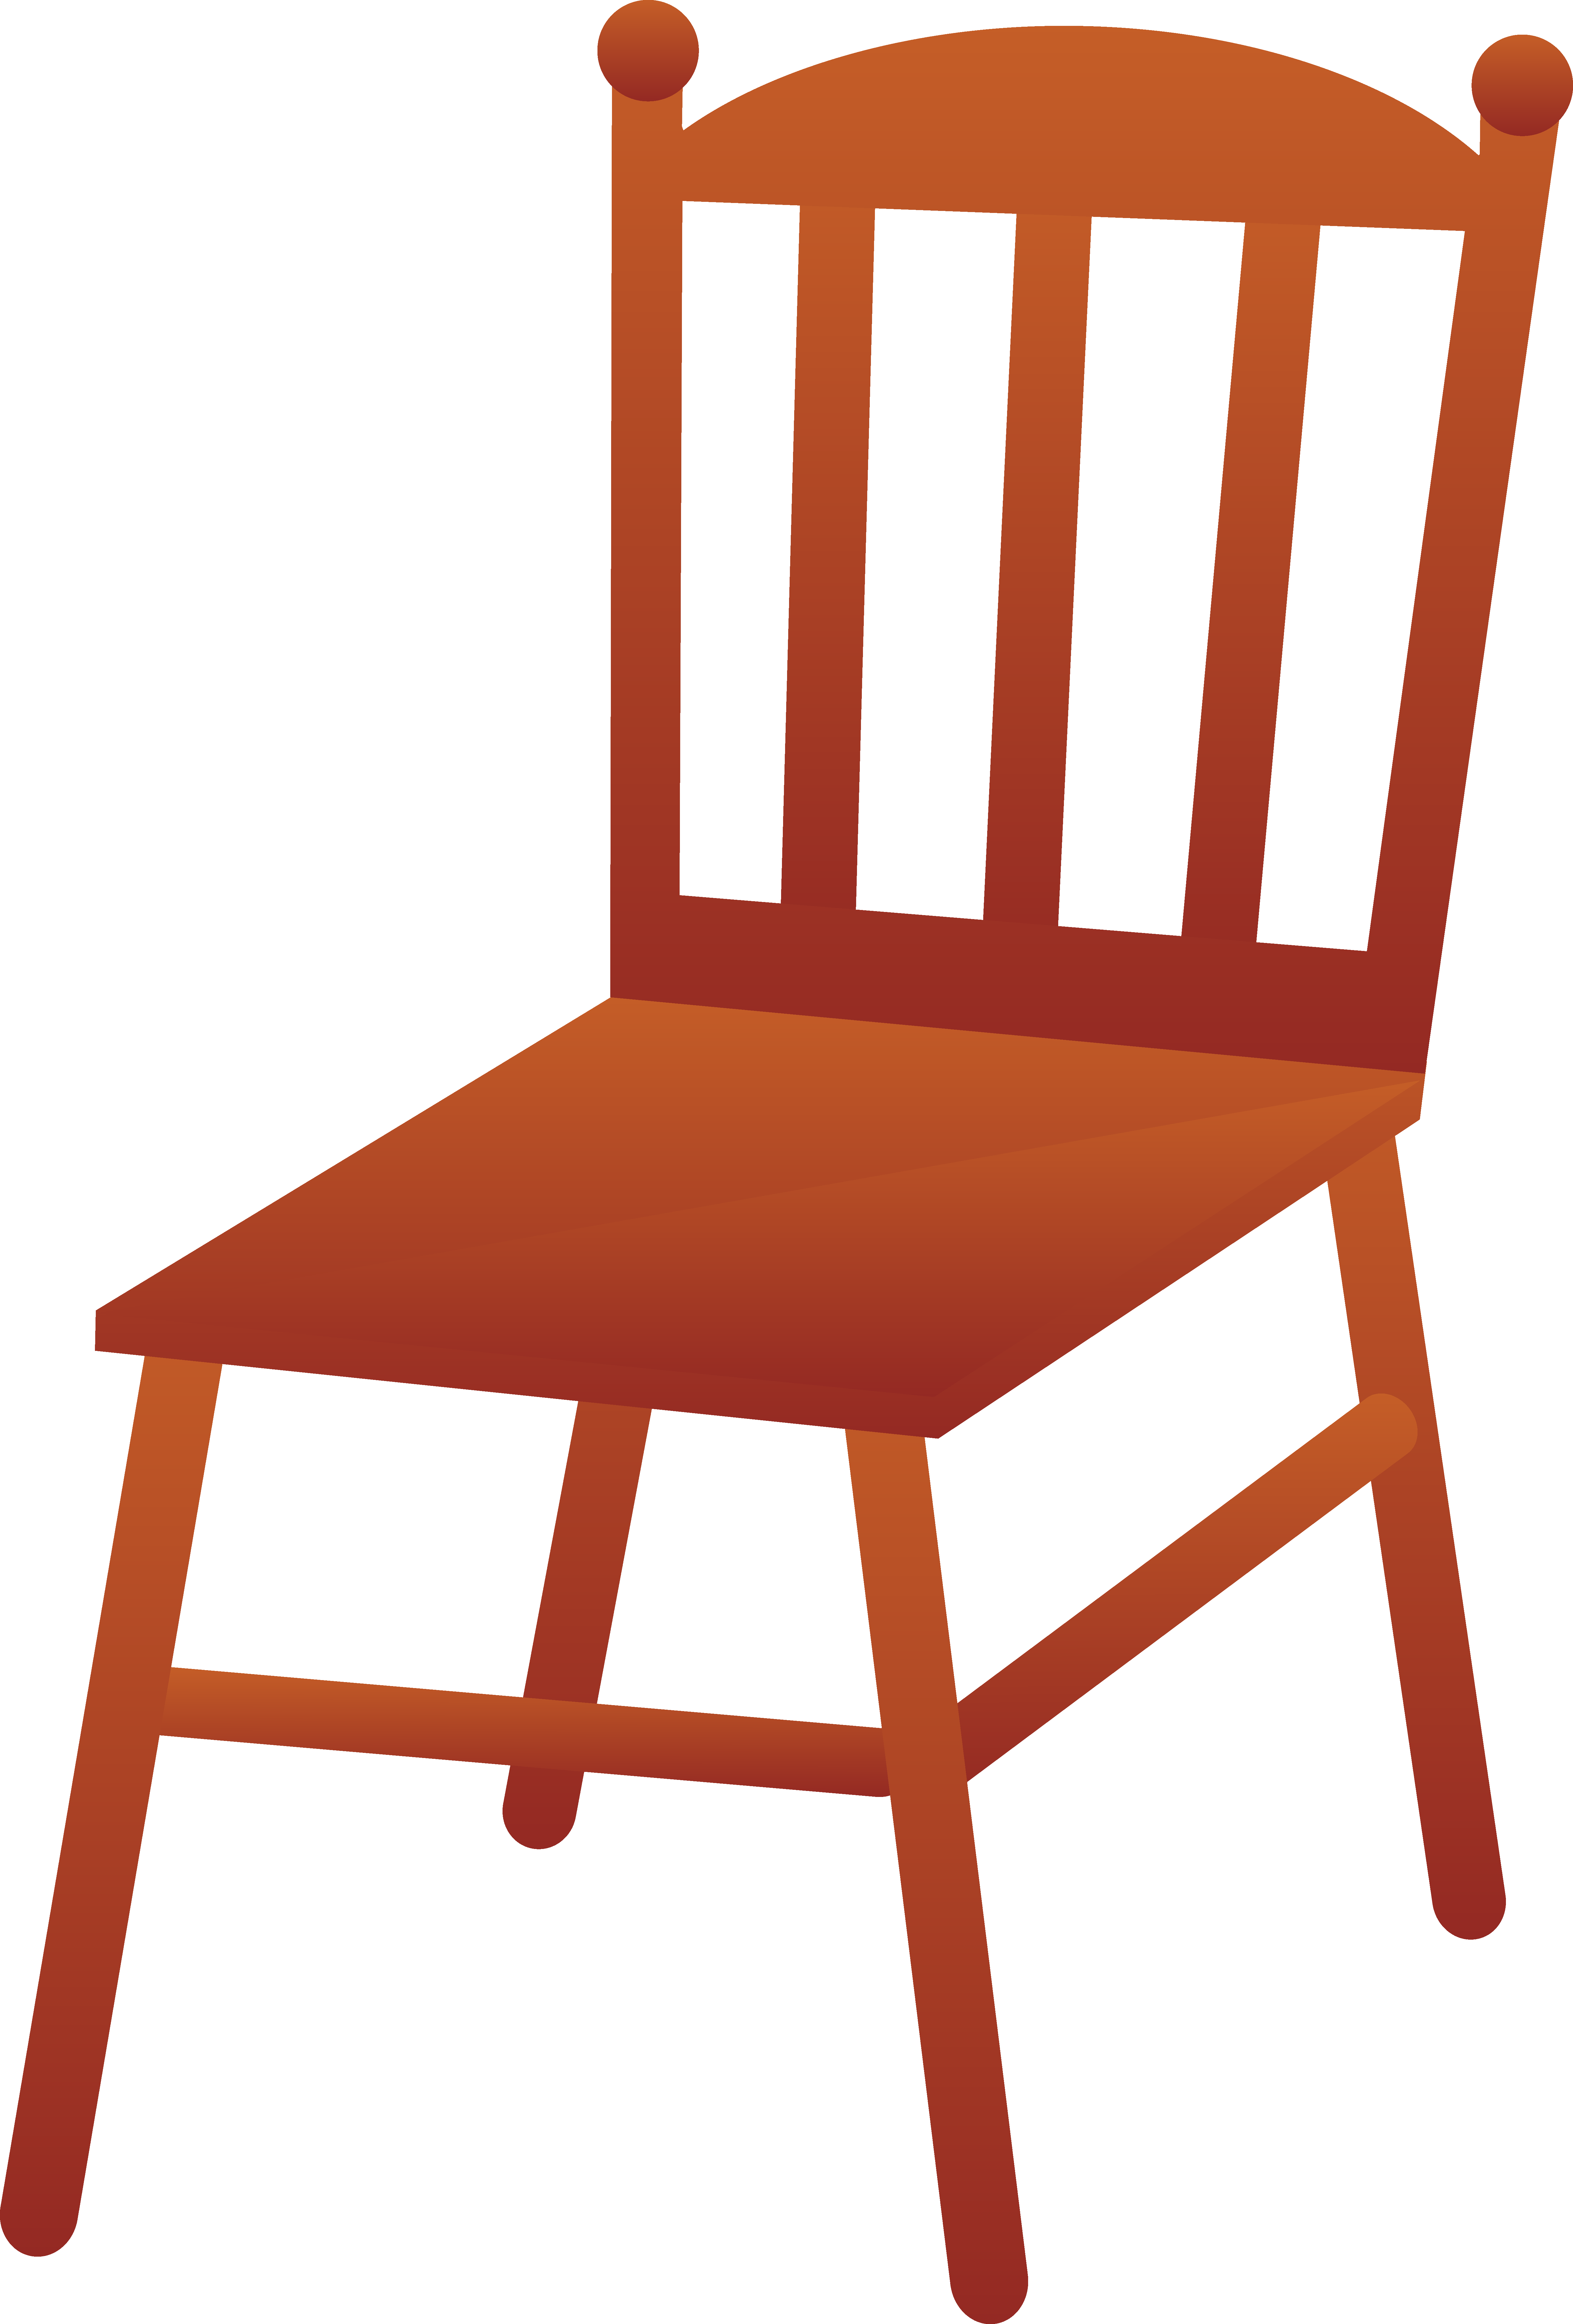 chairs clipart images - photo #15